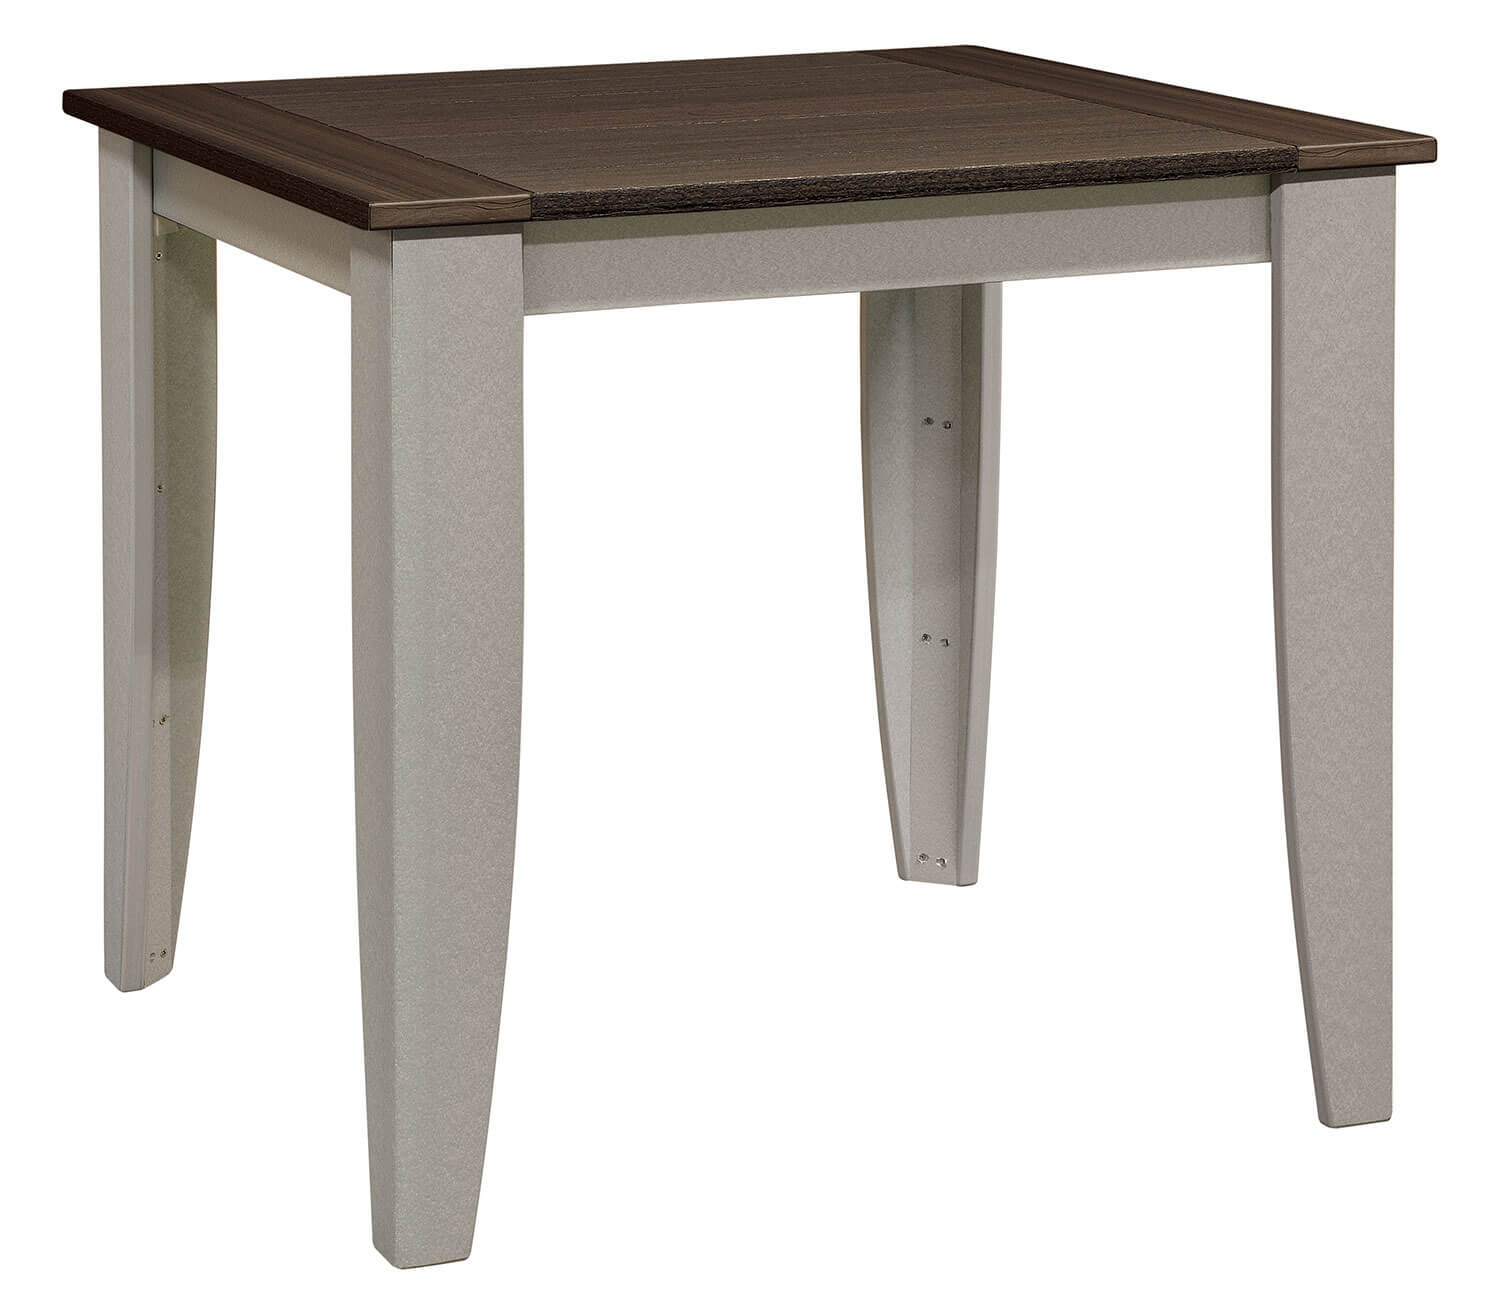 EC Woods Freeport Outdoor Poly Counter Height Table Shown in Brazilian Walnut and Light Gray